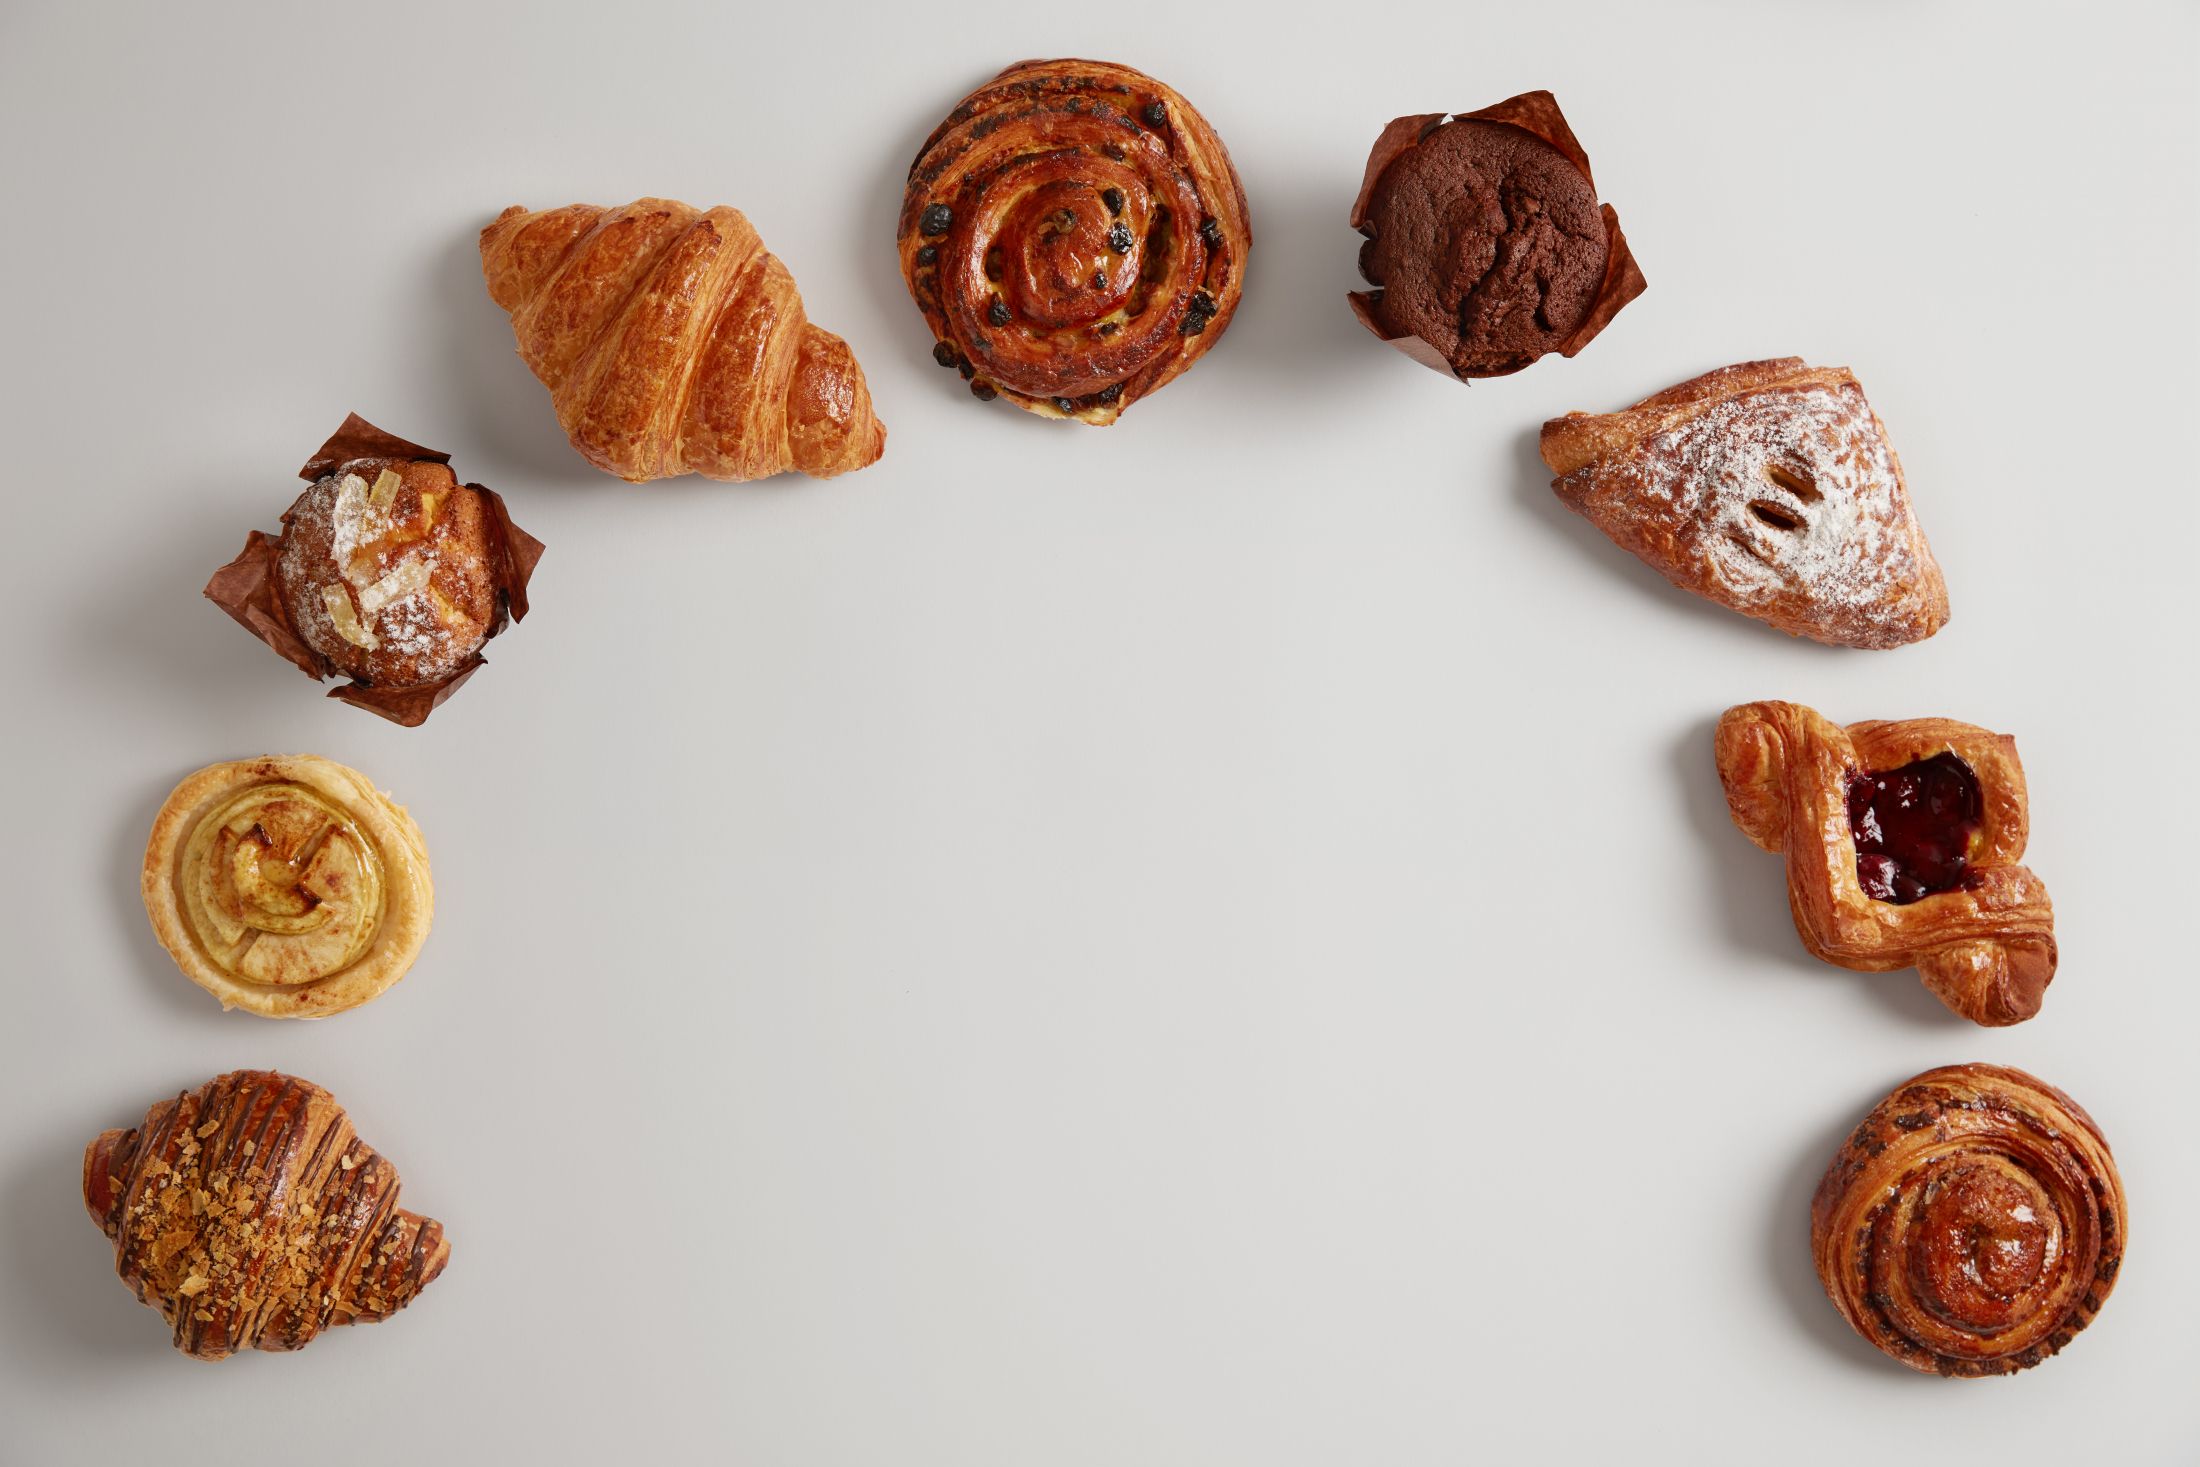 bakery-foodstuff-set-big-variety-of-delicious-confectionery-in-half-circle-on-white-background-croissant-muffin-swirls-and-buns-for-eating-yummy-dessert-sweet-food-and-unhealthy-nutrition.jpg